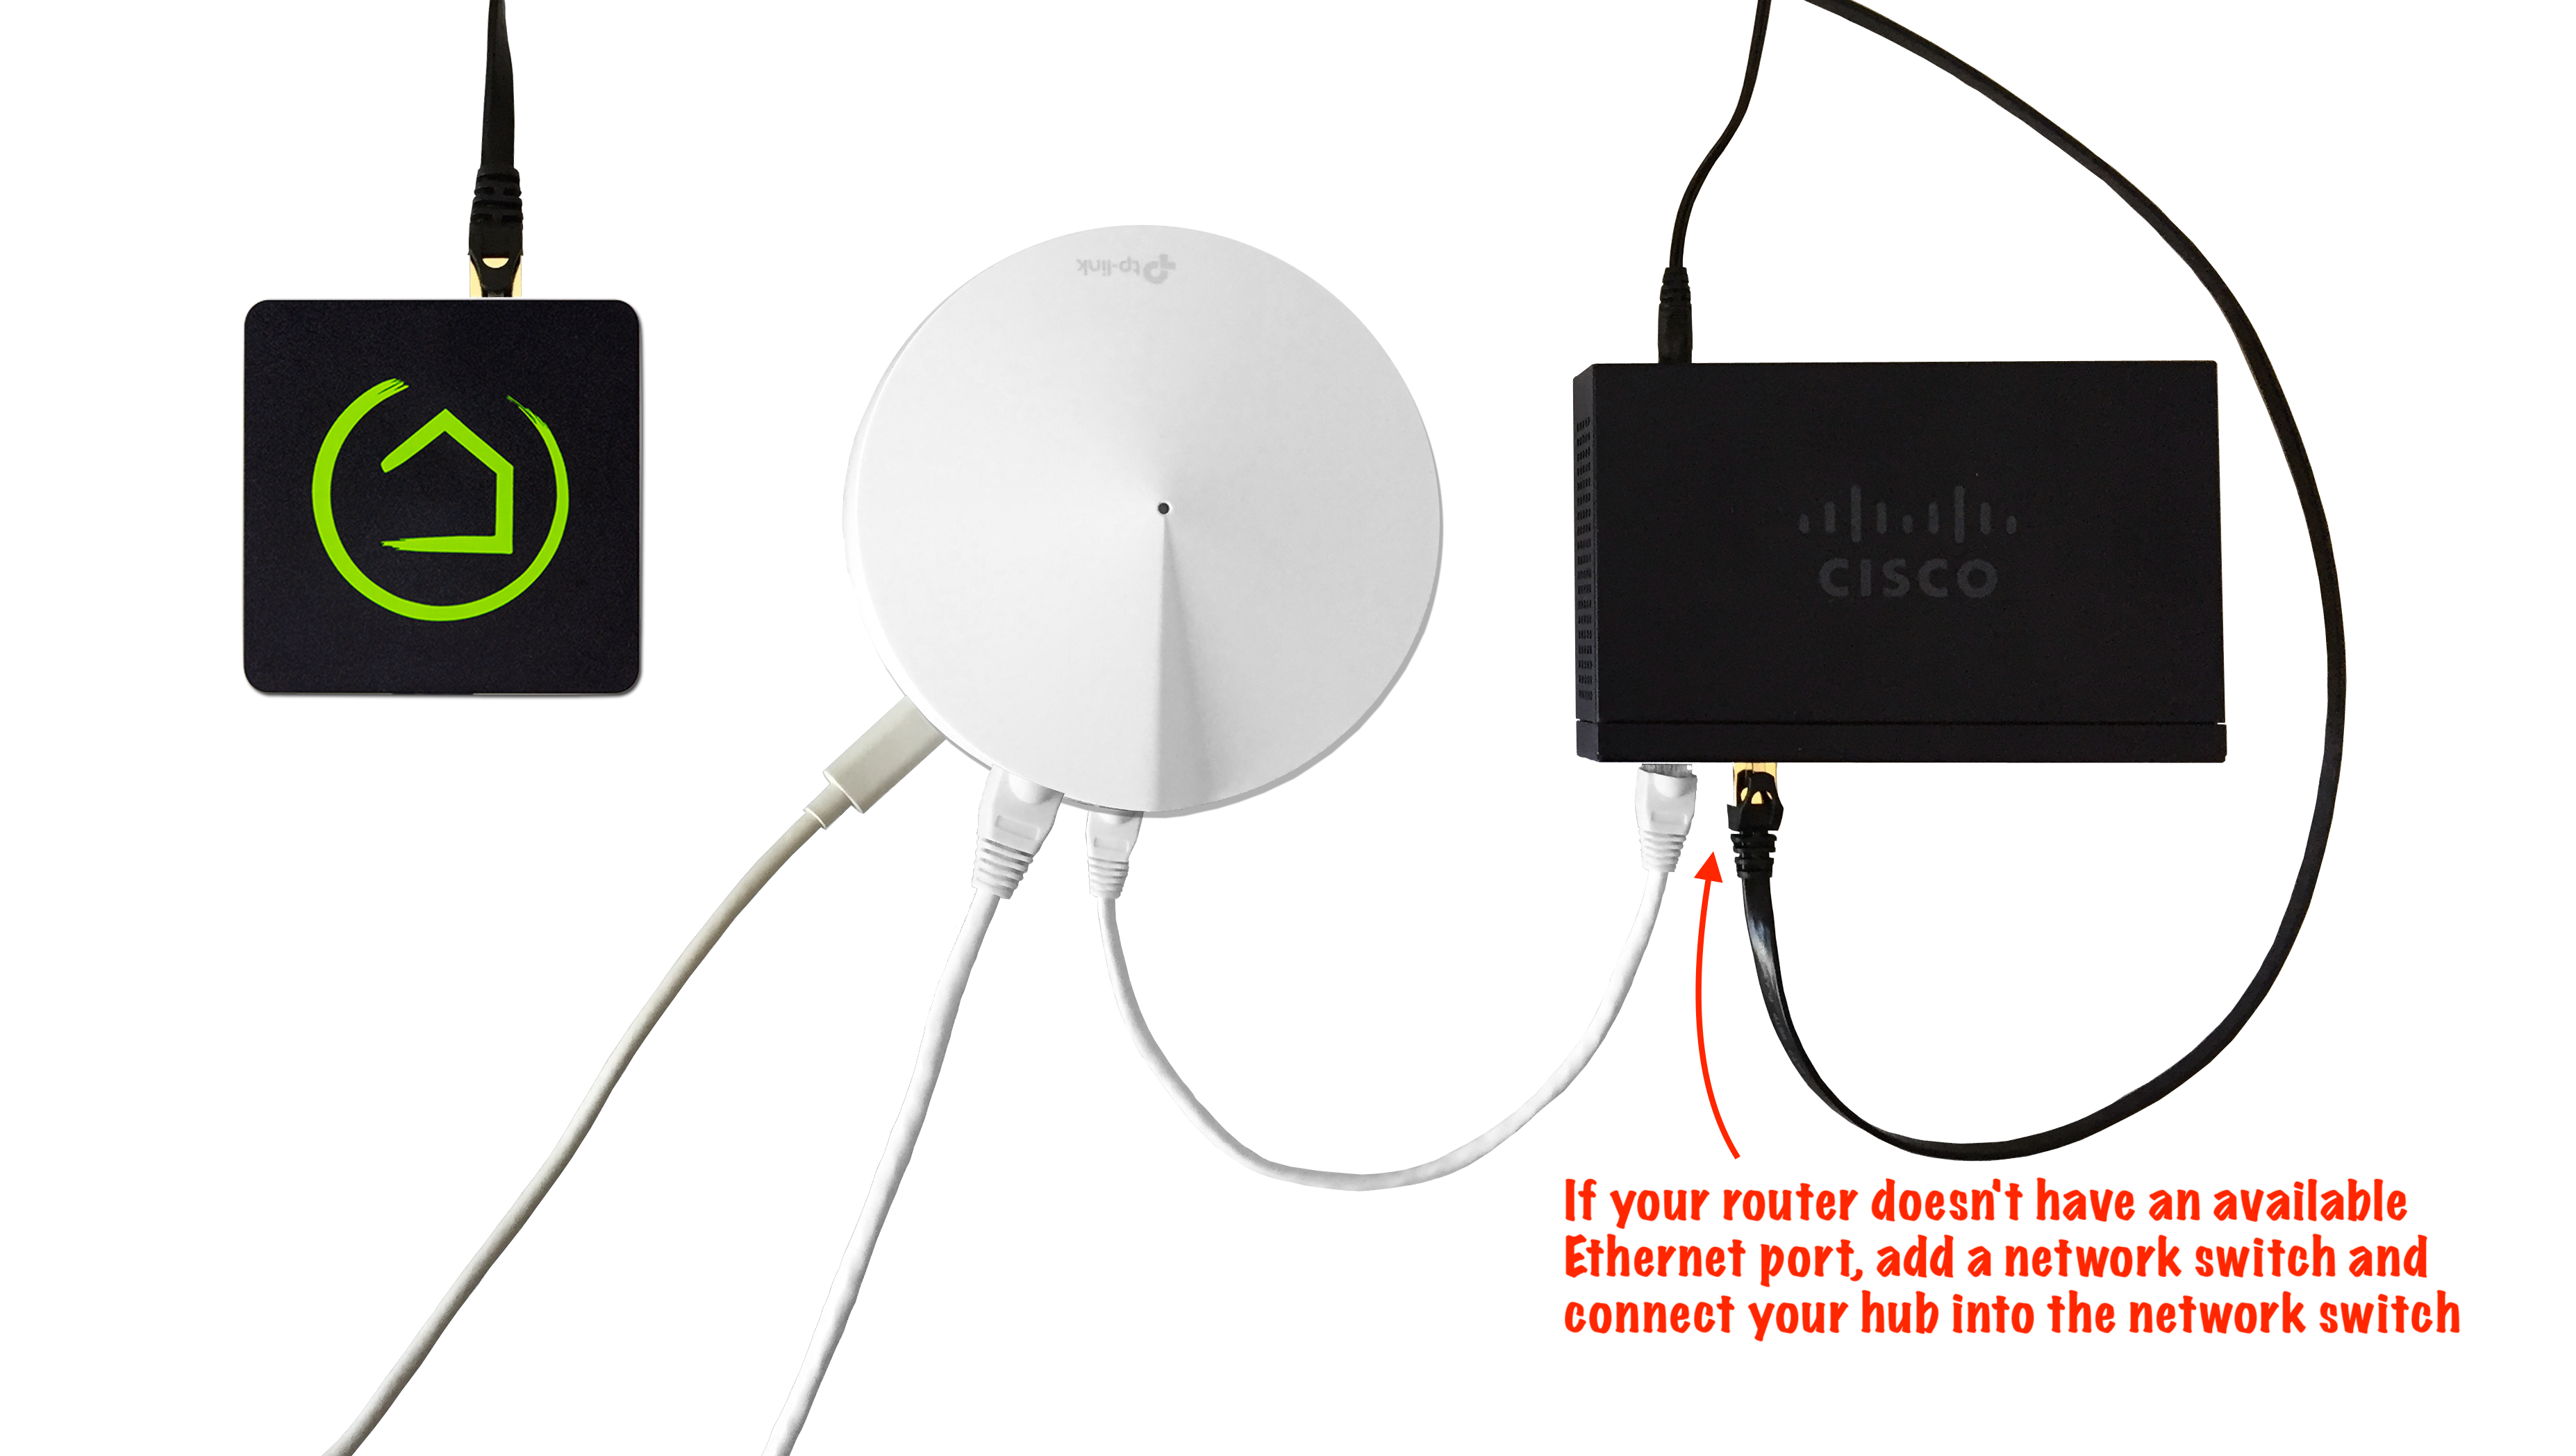 Photo: Insert other end of Ethernet cable into switch plugged into router if router does not have free ports